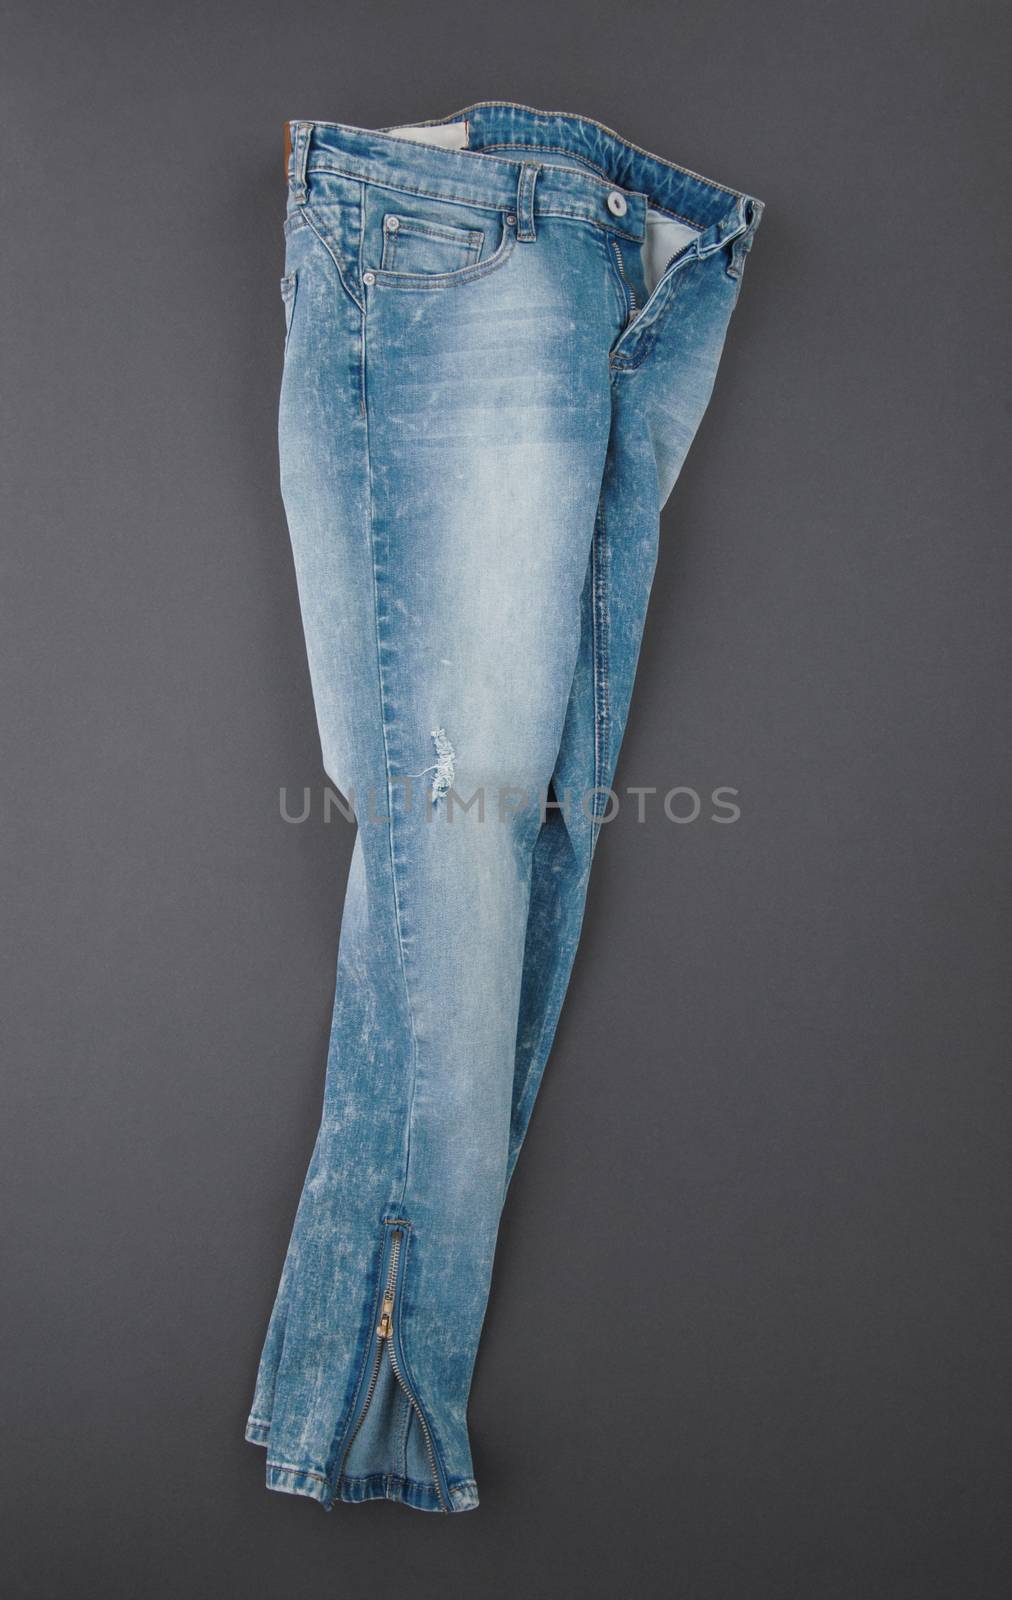 jeans on grey background by A_Karim